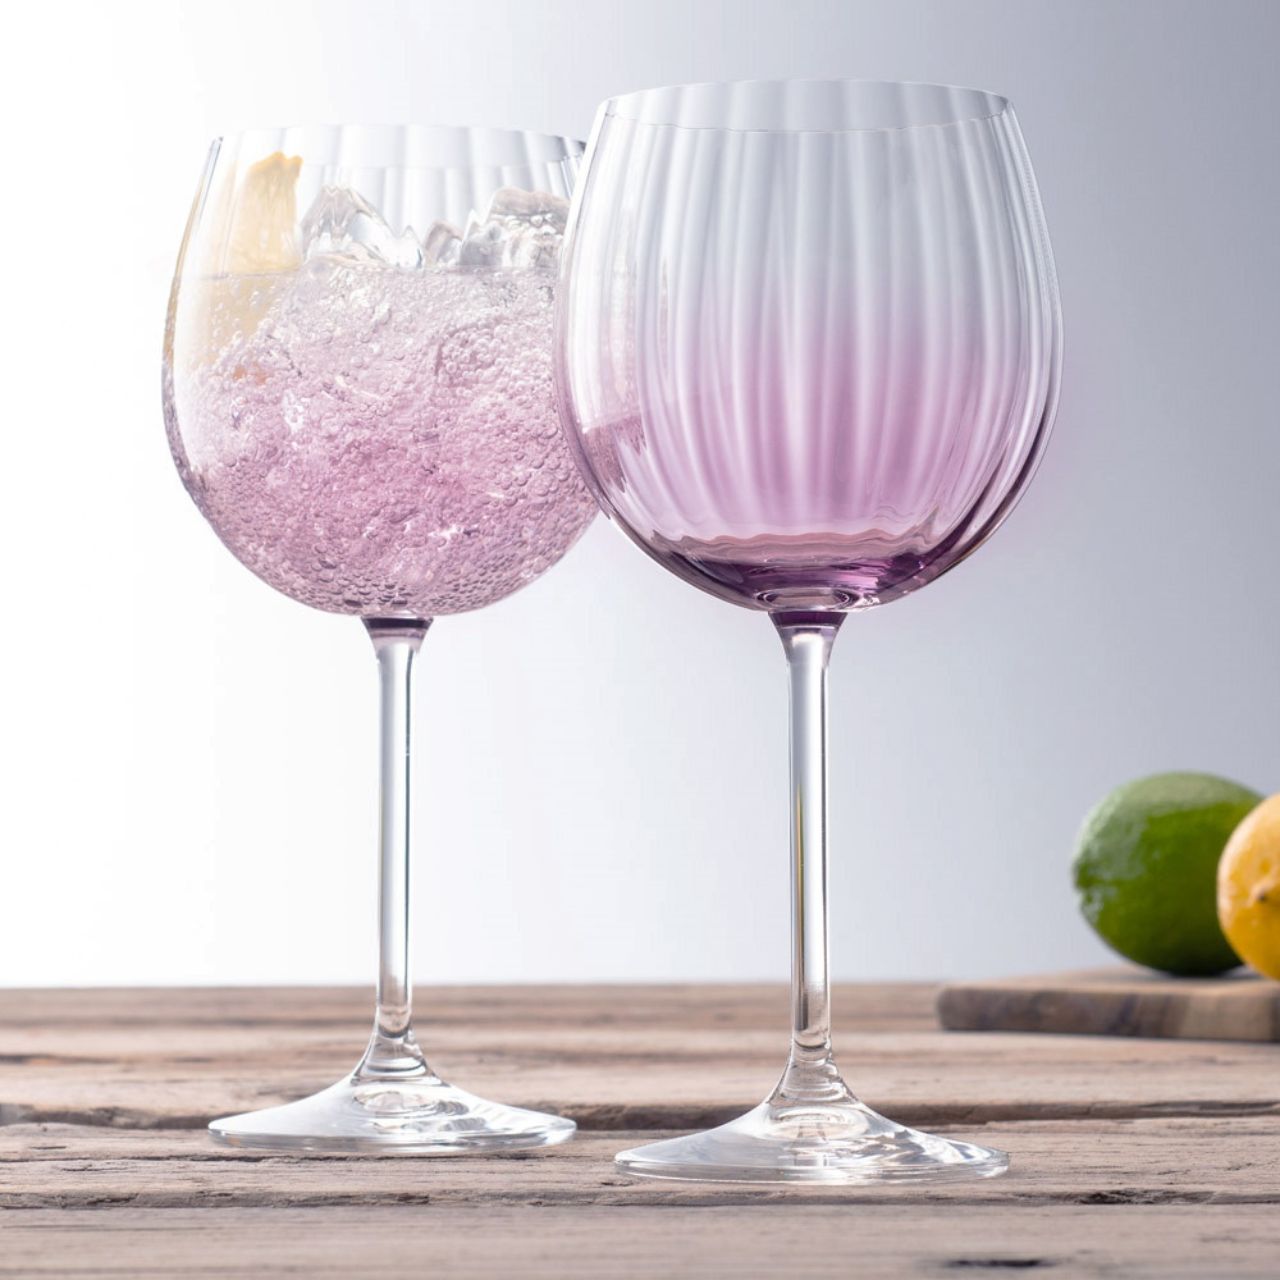 Galway Crystal Erne Gin & Tonic Pair Amethyst  Amethyst colour Gin and Tonic glasses in the Erne suite. Beautiful large balloon gin glasses with elegant lines design in an Amethyst colour. The glass has been designed to add a splash of colour and light design to a stunning gin glass.